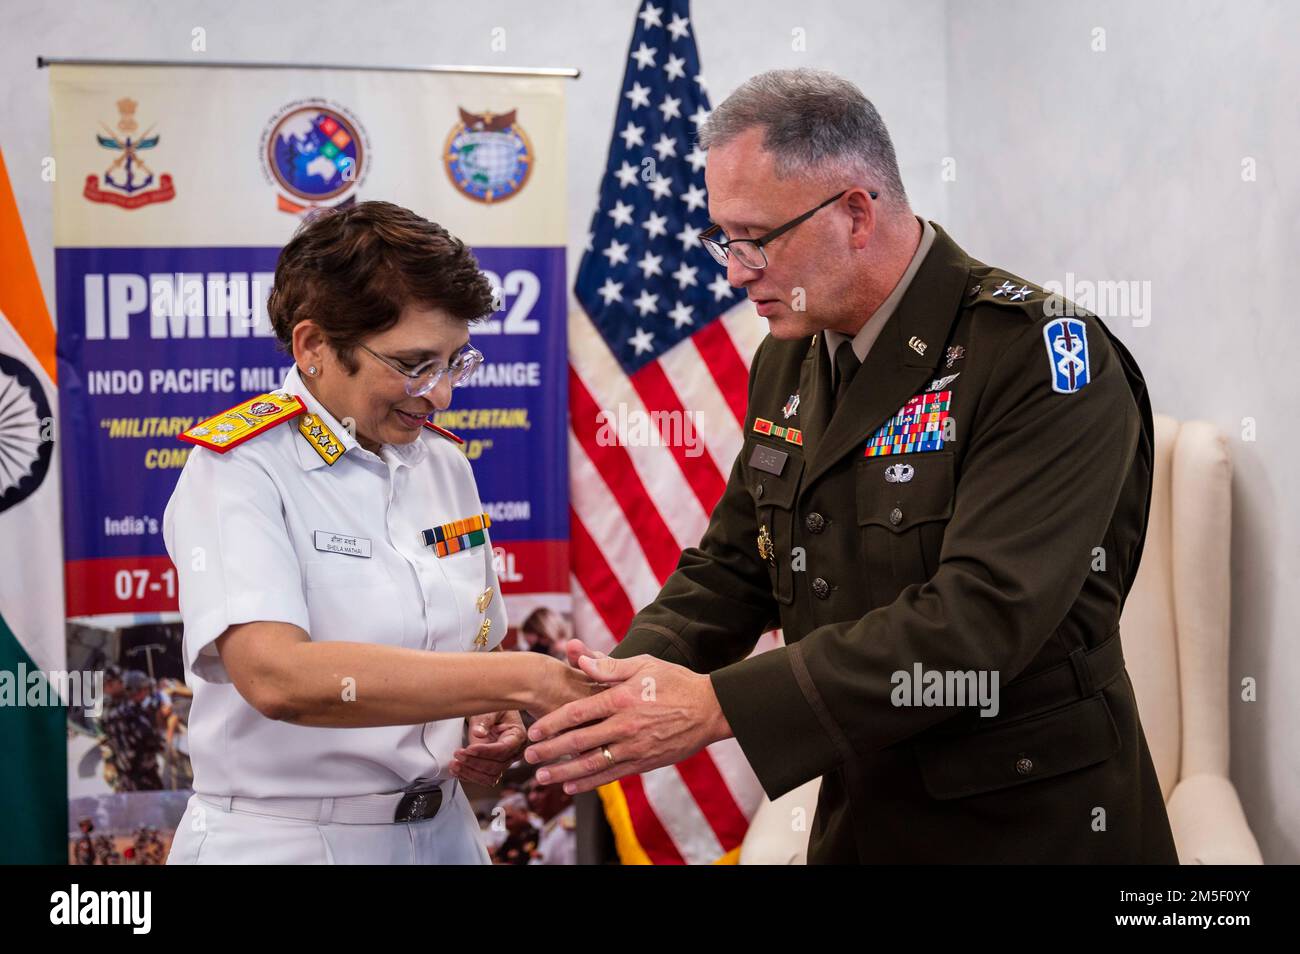 220309-N-XC372-1352 NEW DELHI (Mar. 9, 2022) Maj. Gen. Michael Place, Commanding General of 18th Medical Command, right, presents a coin to Surg V Adm Sheila S. Mothei, Director General of Organization and Personnel at the Armed Forces Medical Services, during the Indo-Pacific Military Health Exchange 2021-22. IPMHE 2021-22 is a multilateral premier military medical event co-hosted by India’s Armed Forces Medical Services and U.S. Indo-Pacific Command, where health professionals of various backgrounds integrate to develop relationships and shape global health engagement in the Indo-Pacific reg Stock Photo